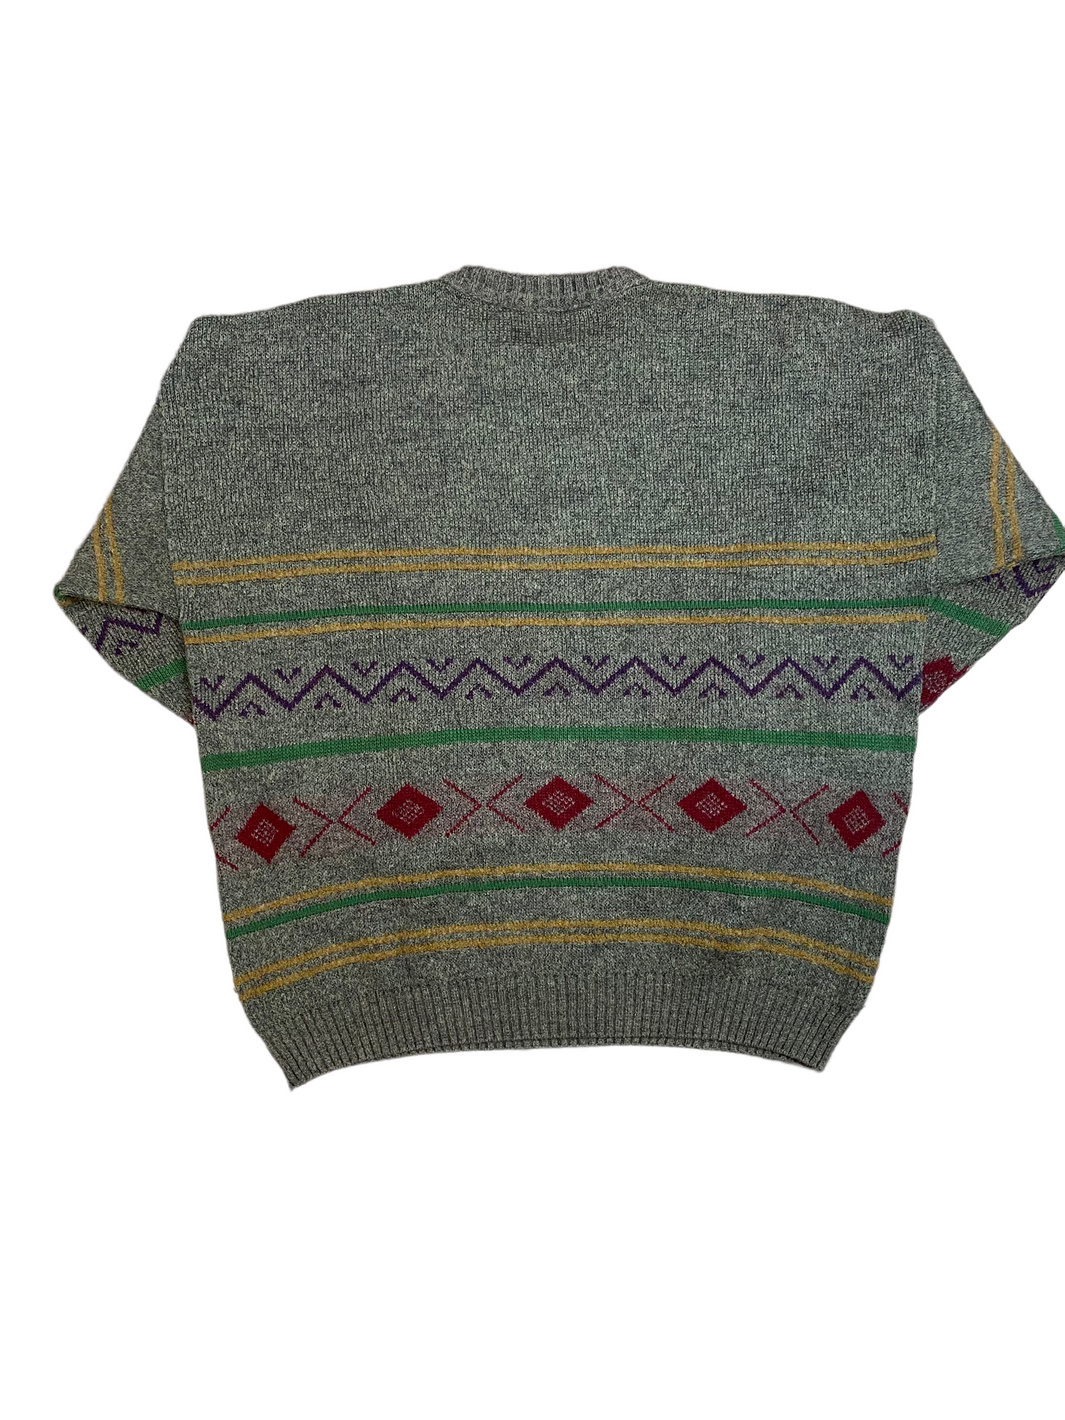 Wool Pullover Bisson